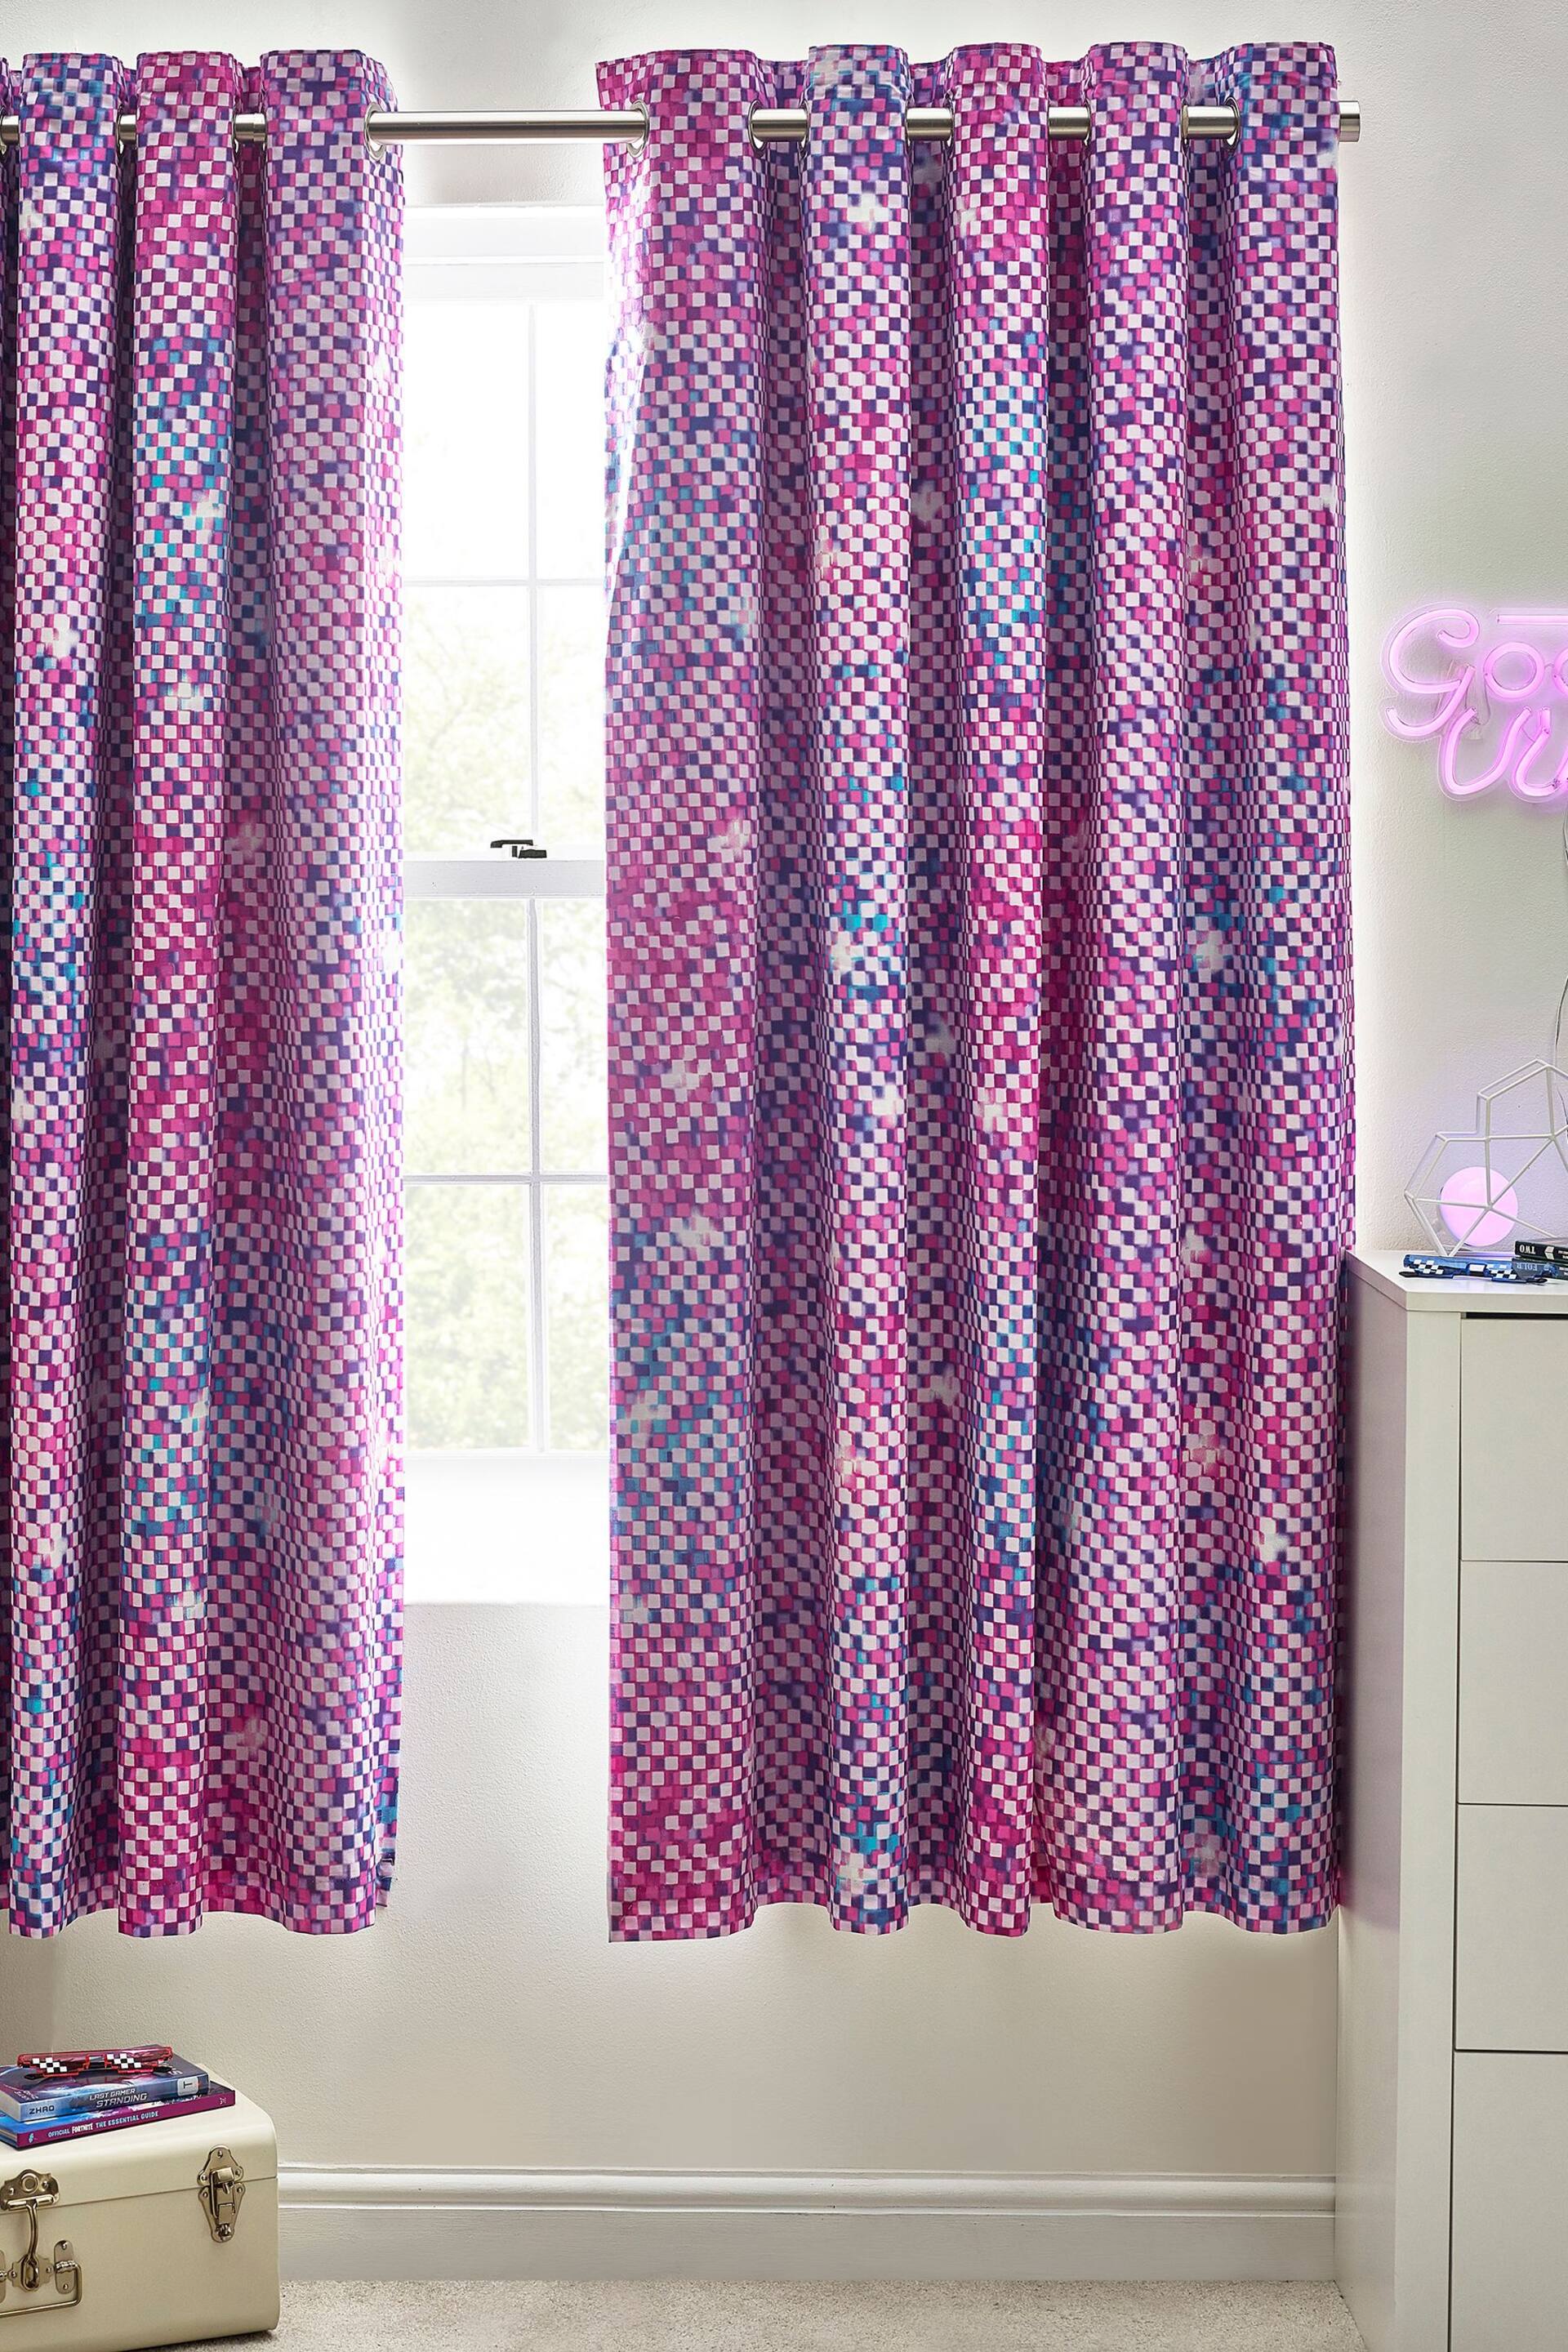 Purple Pixel Ombre Eyelet Blackout Curtains - Image 1 of 4